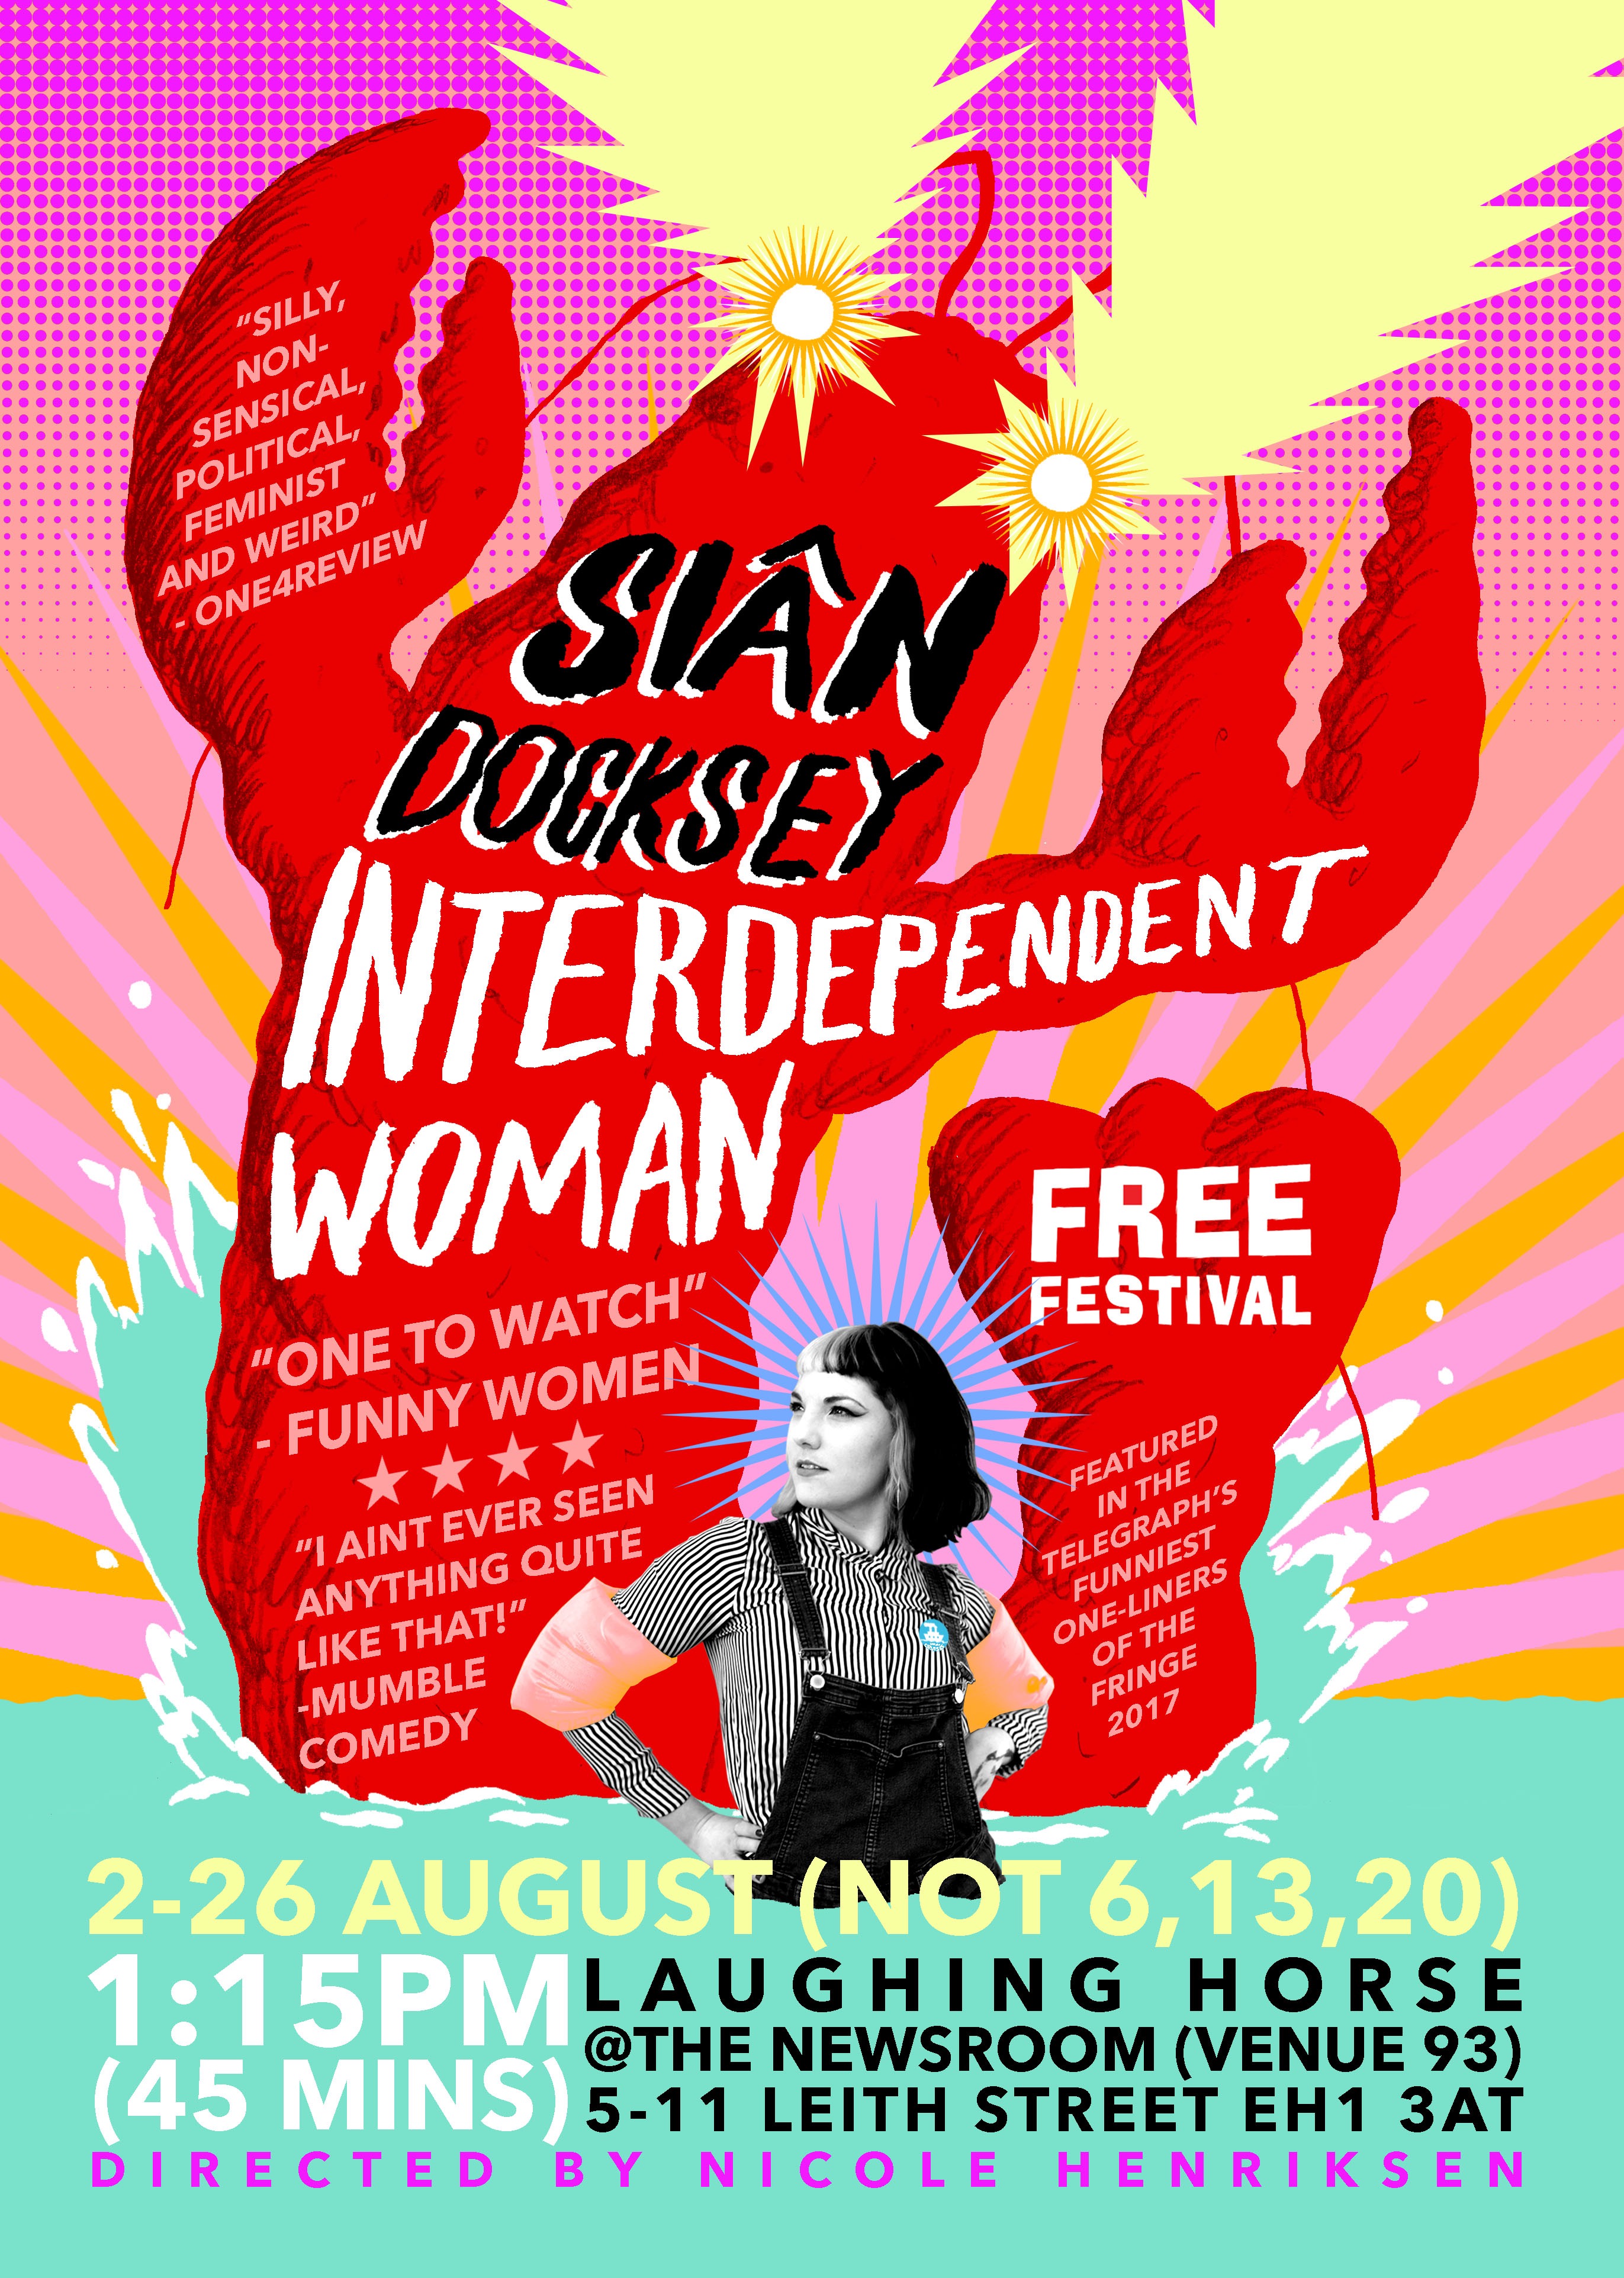 The poster for Interdependent Woman